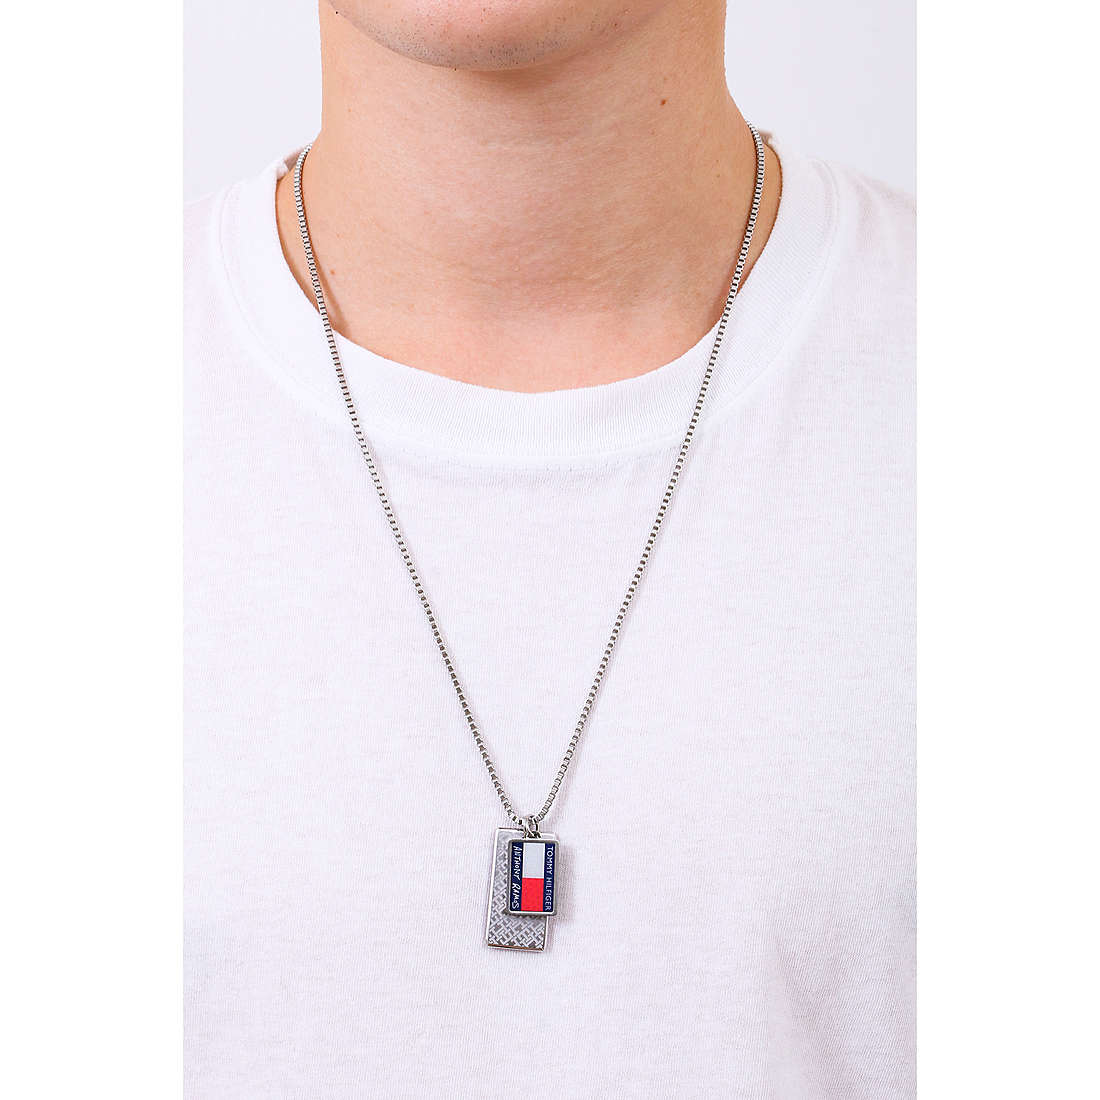 Tommy Hilfiger necklaces Anthony Ramos Capsule man 2790454 wearing